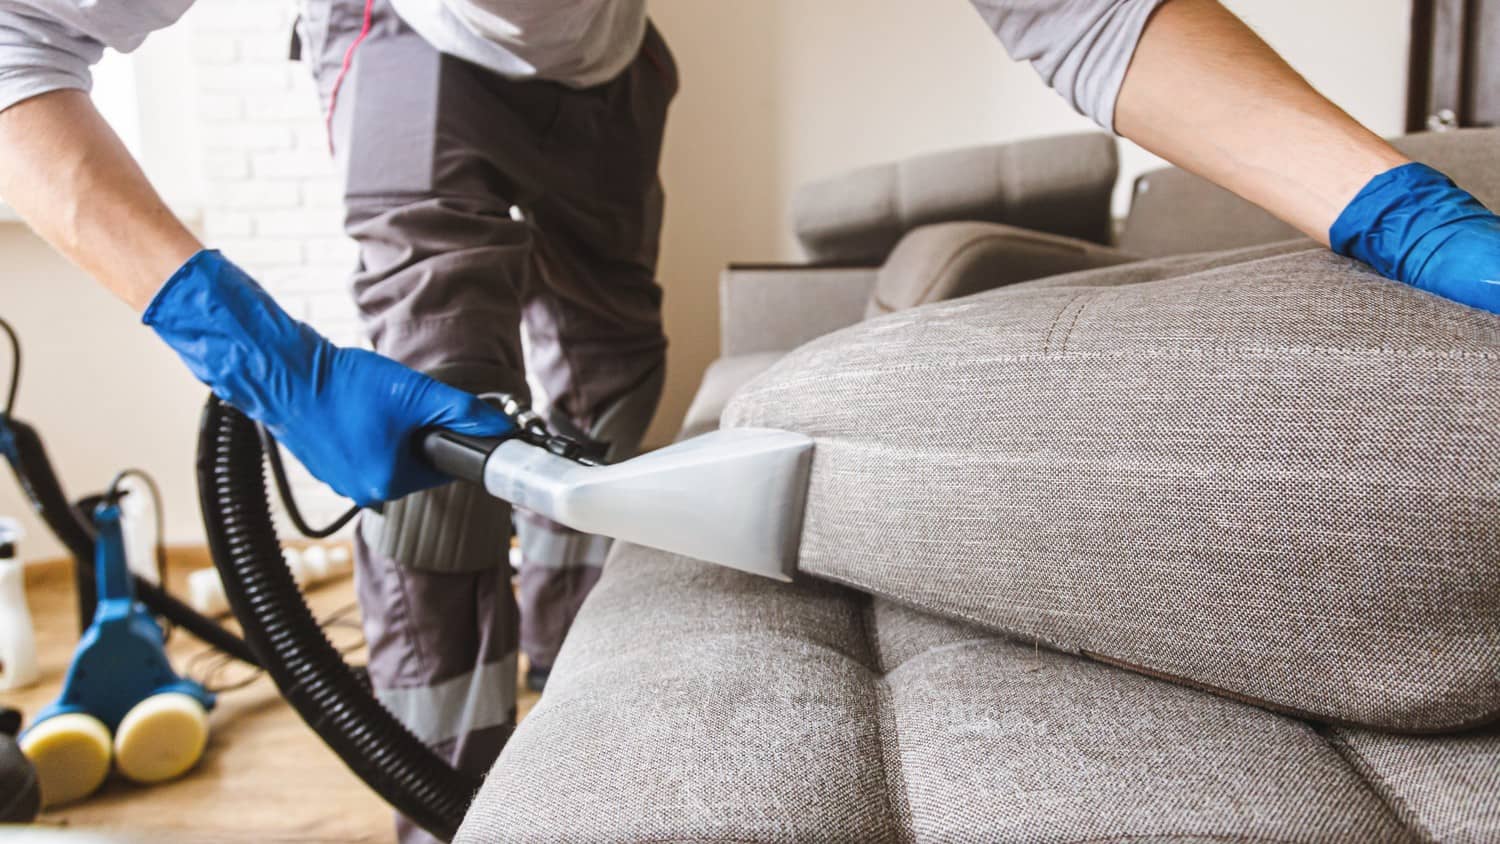 A professional cleaning service using a powerful machine to clean upholstery, removing dirt and stains, leaving it fresh and revitalized.